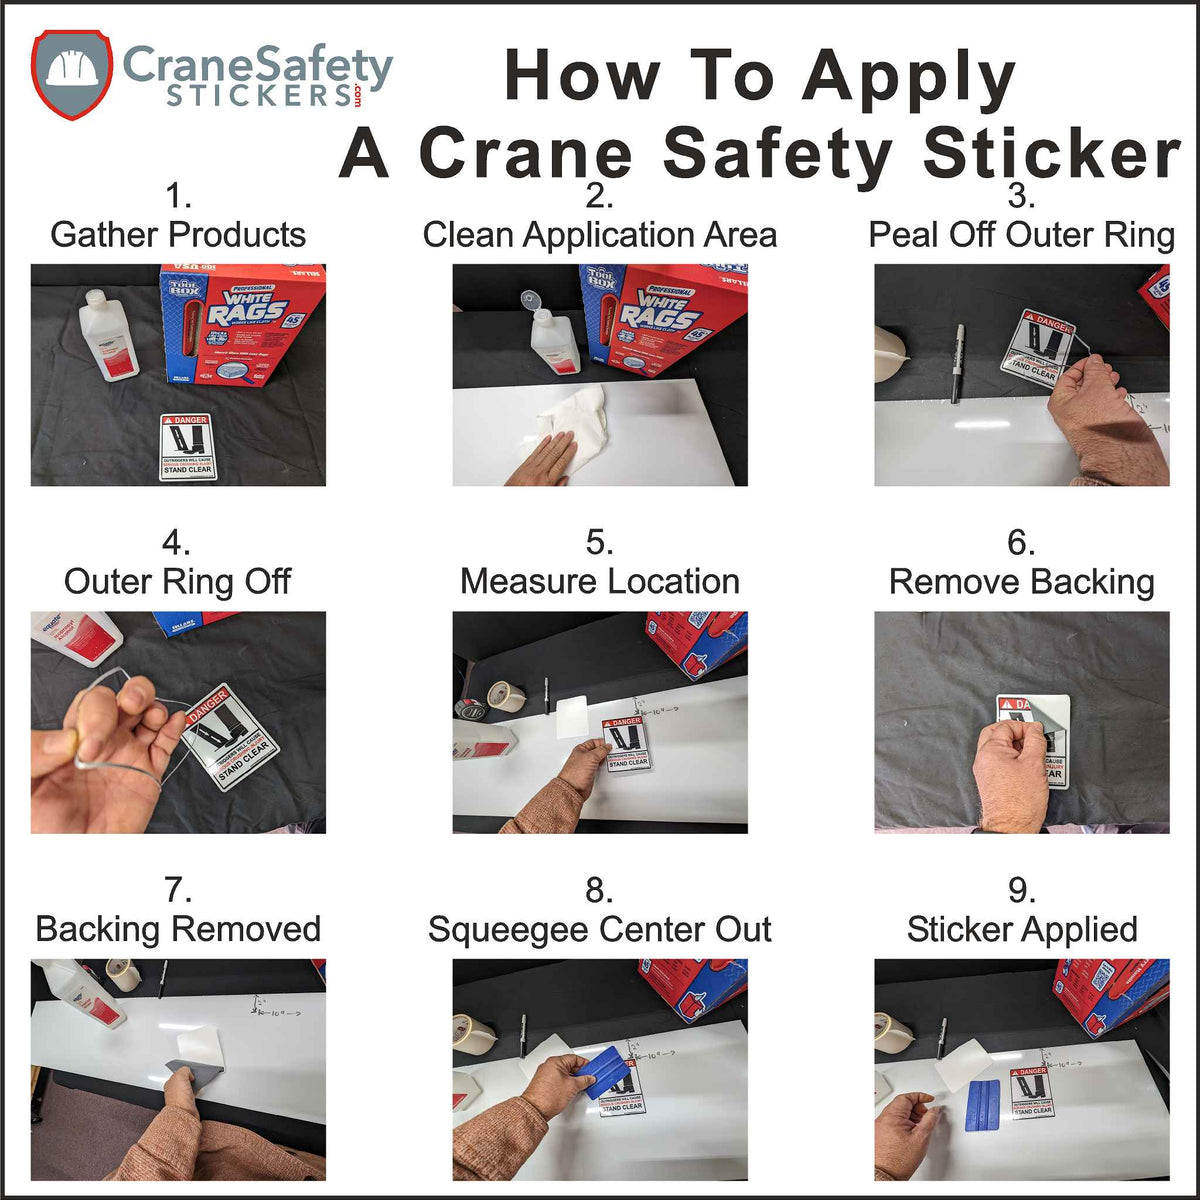 How To Apply Our Never Hoist Personnel Sticker.